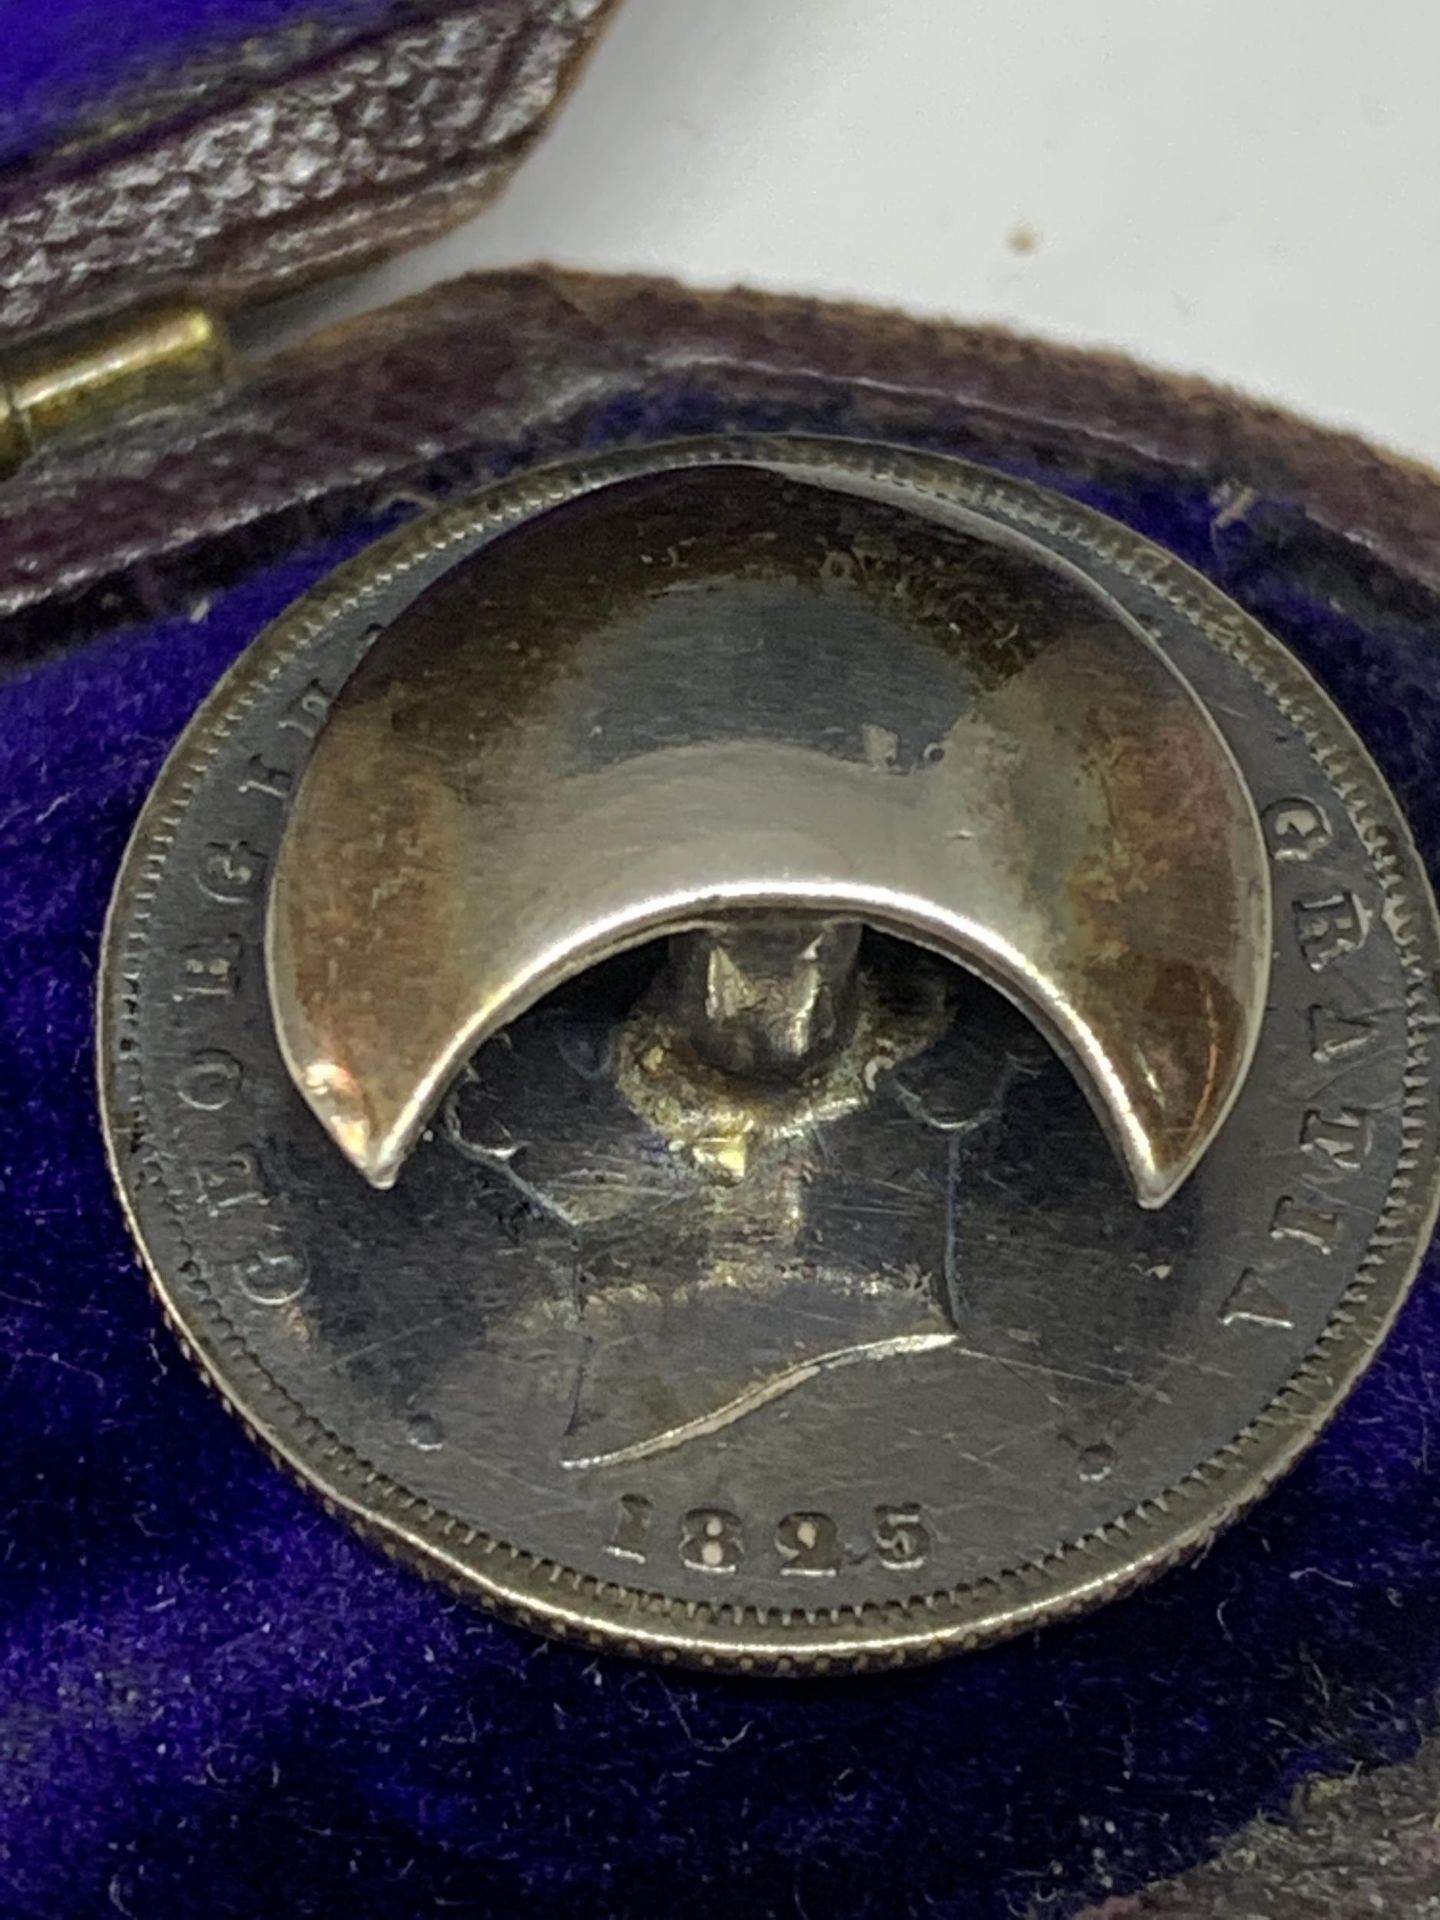 A PAIR OF GEORGE IV SHILLING CUFF LINKS IN ORIGINAL PRESENTATION BOX - Image 3 of 4